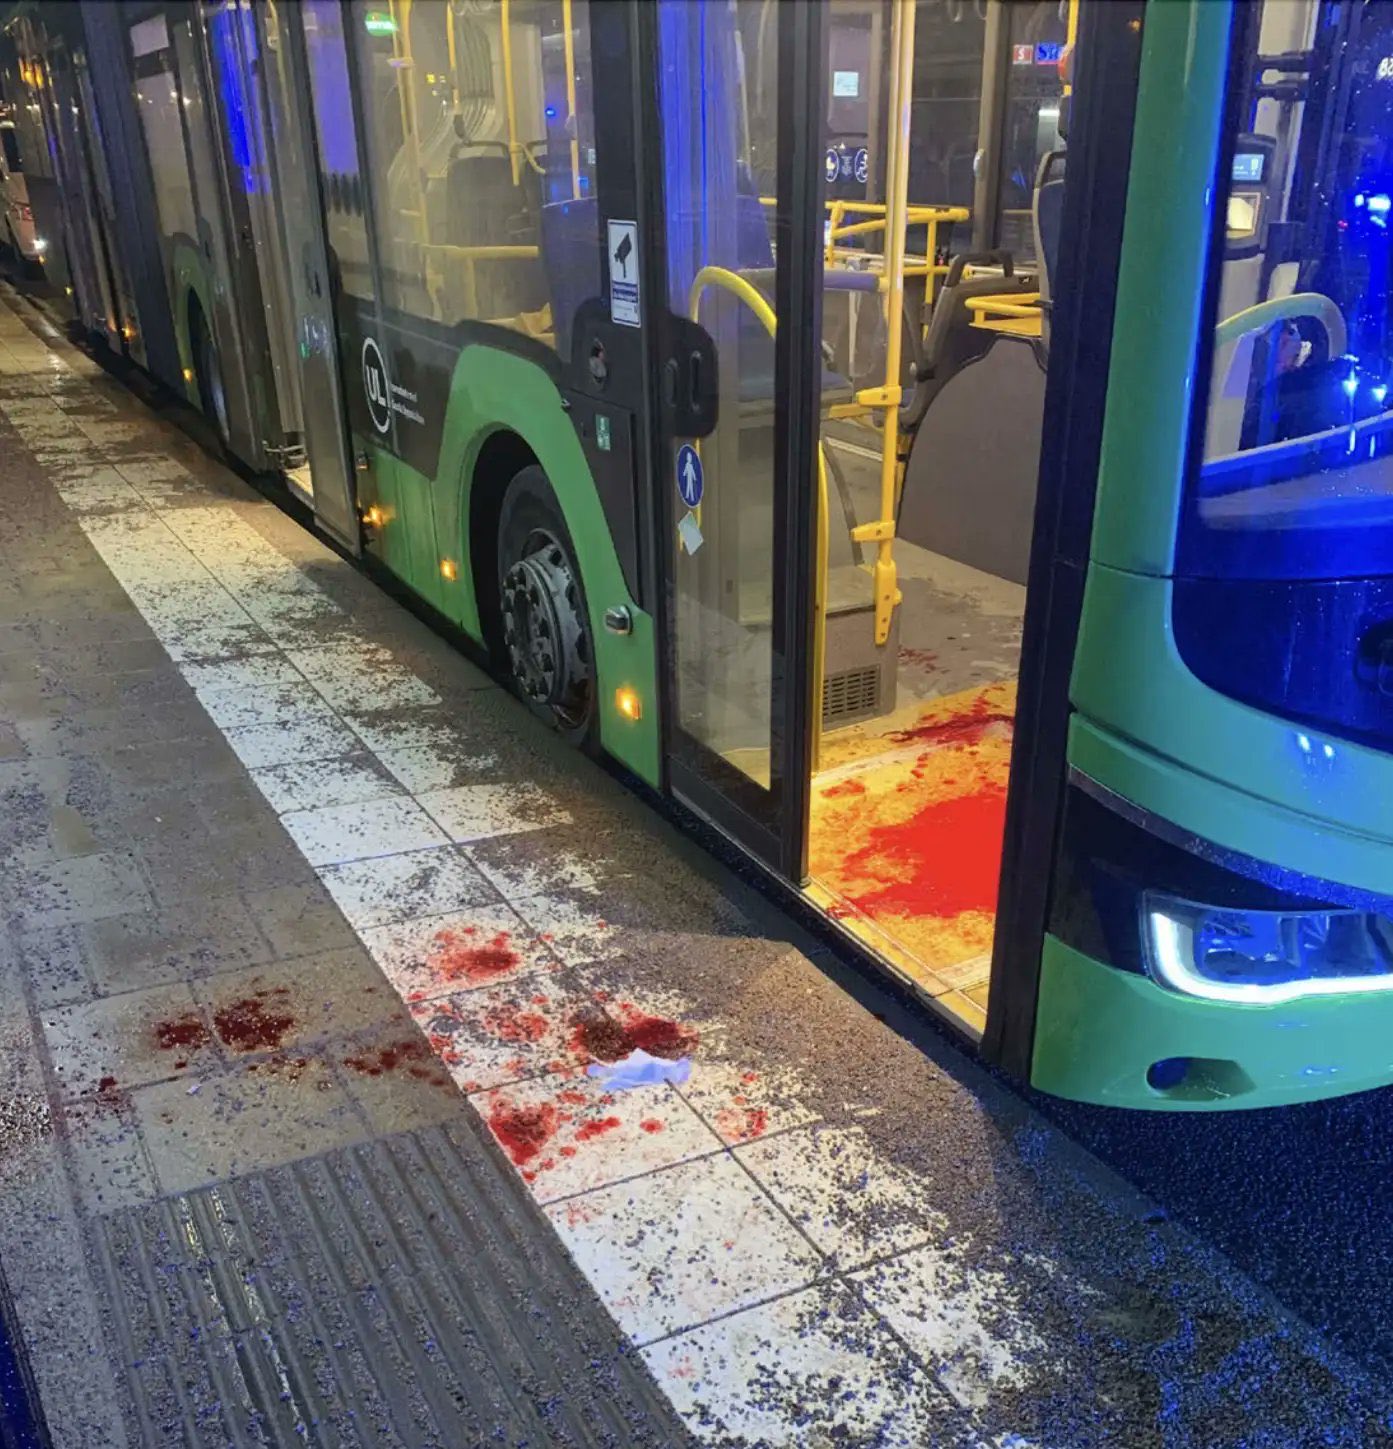 Afghan immigrant stabs bus driver in Sweden